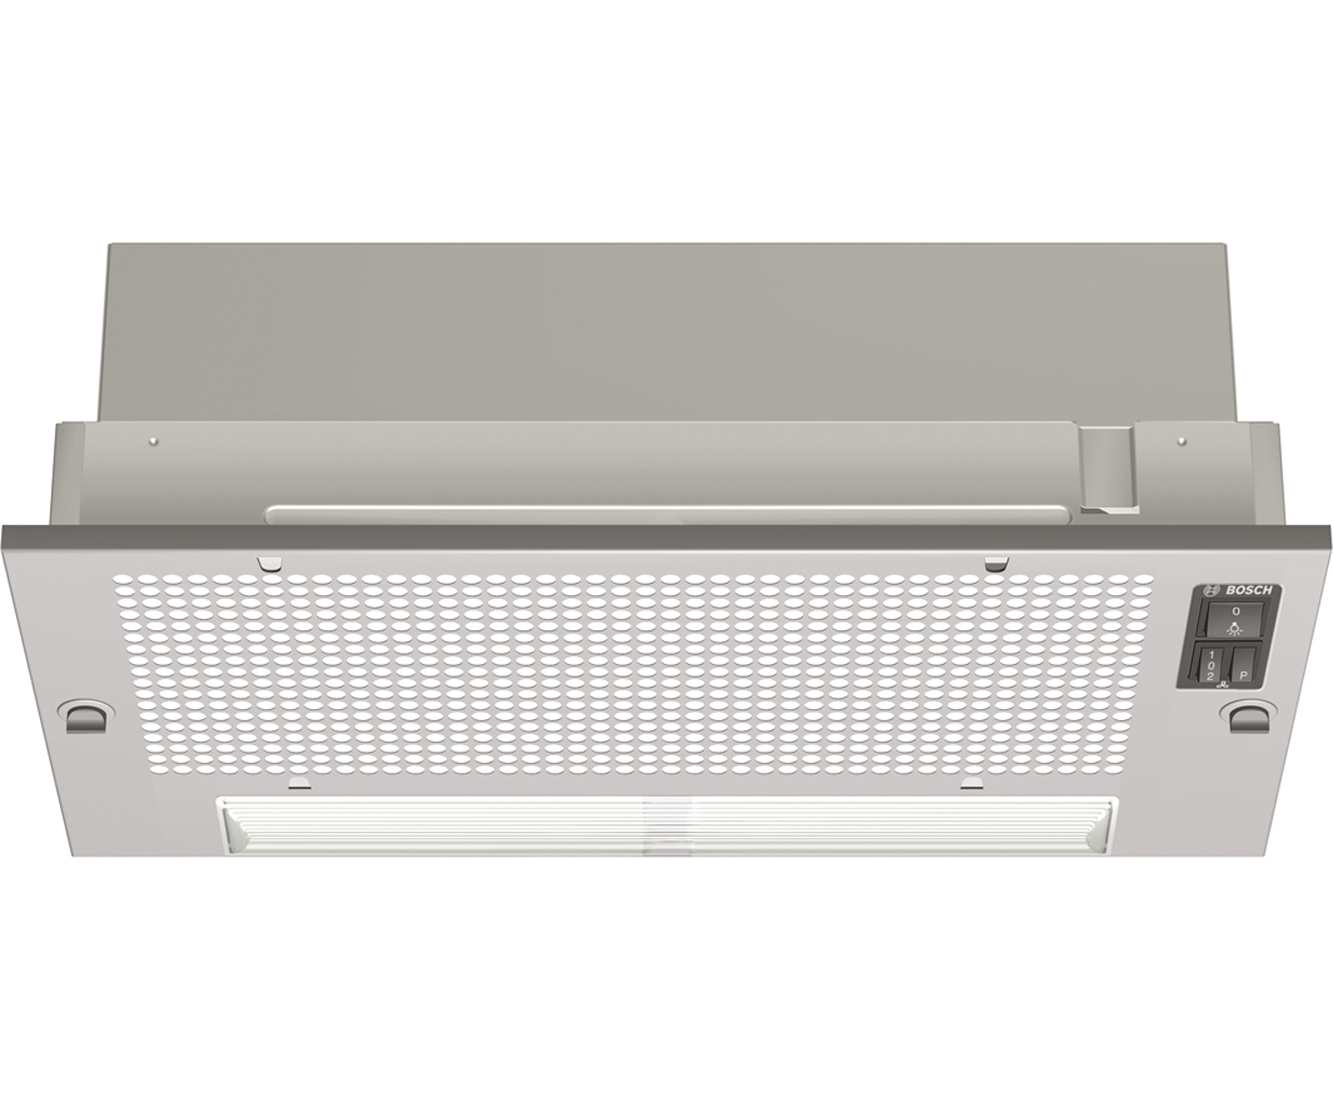 Bosch Serie 4 DHL535BGB Integrated Cooker Hood in Silver Grey